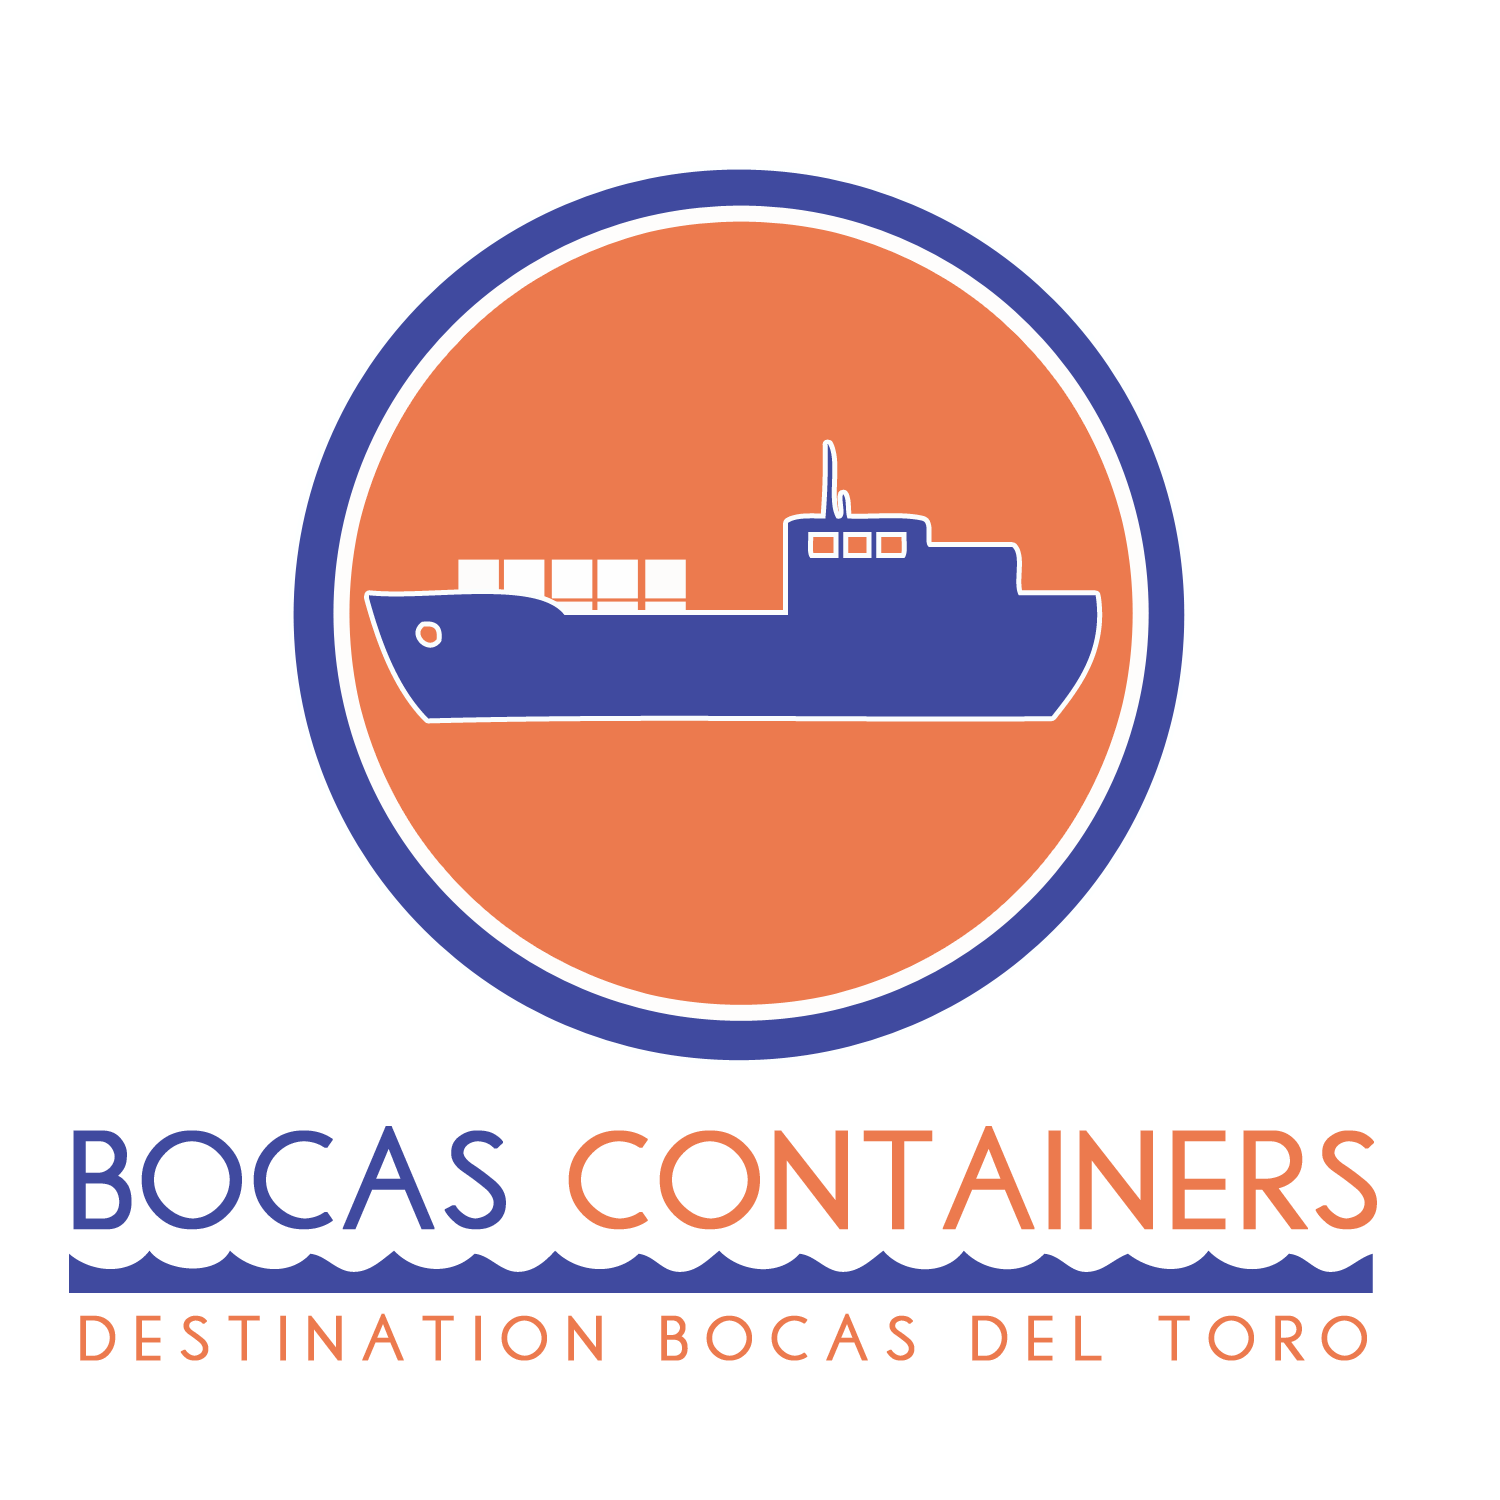 Bocas Containers